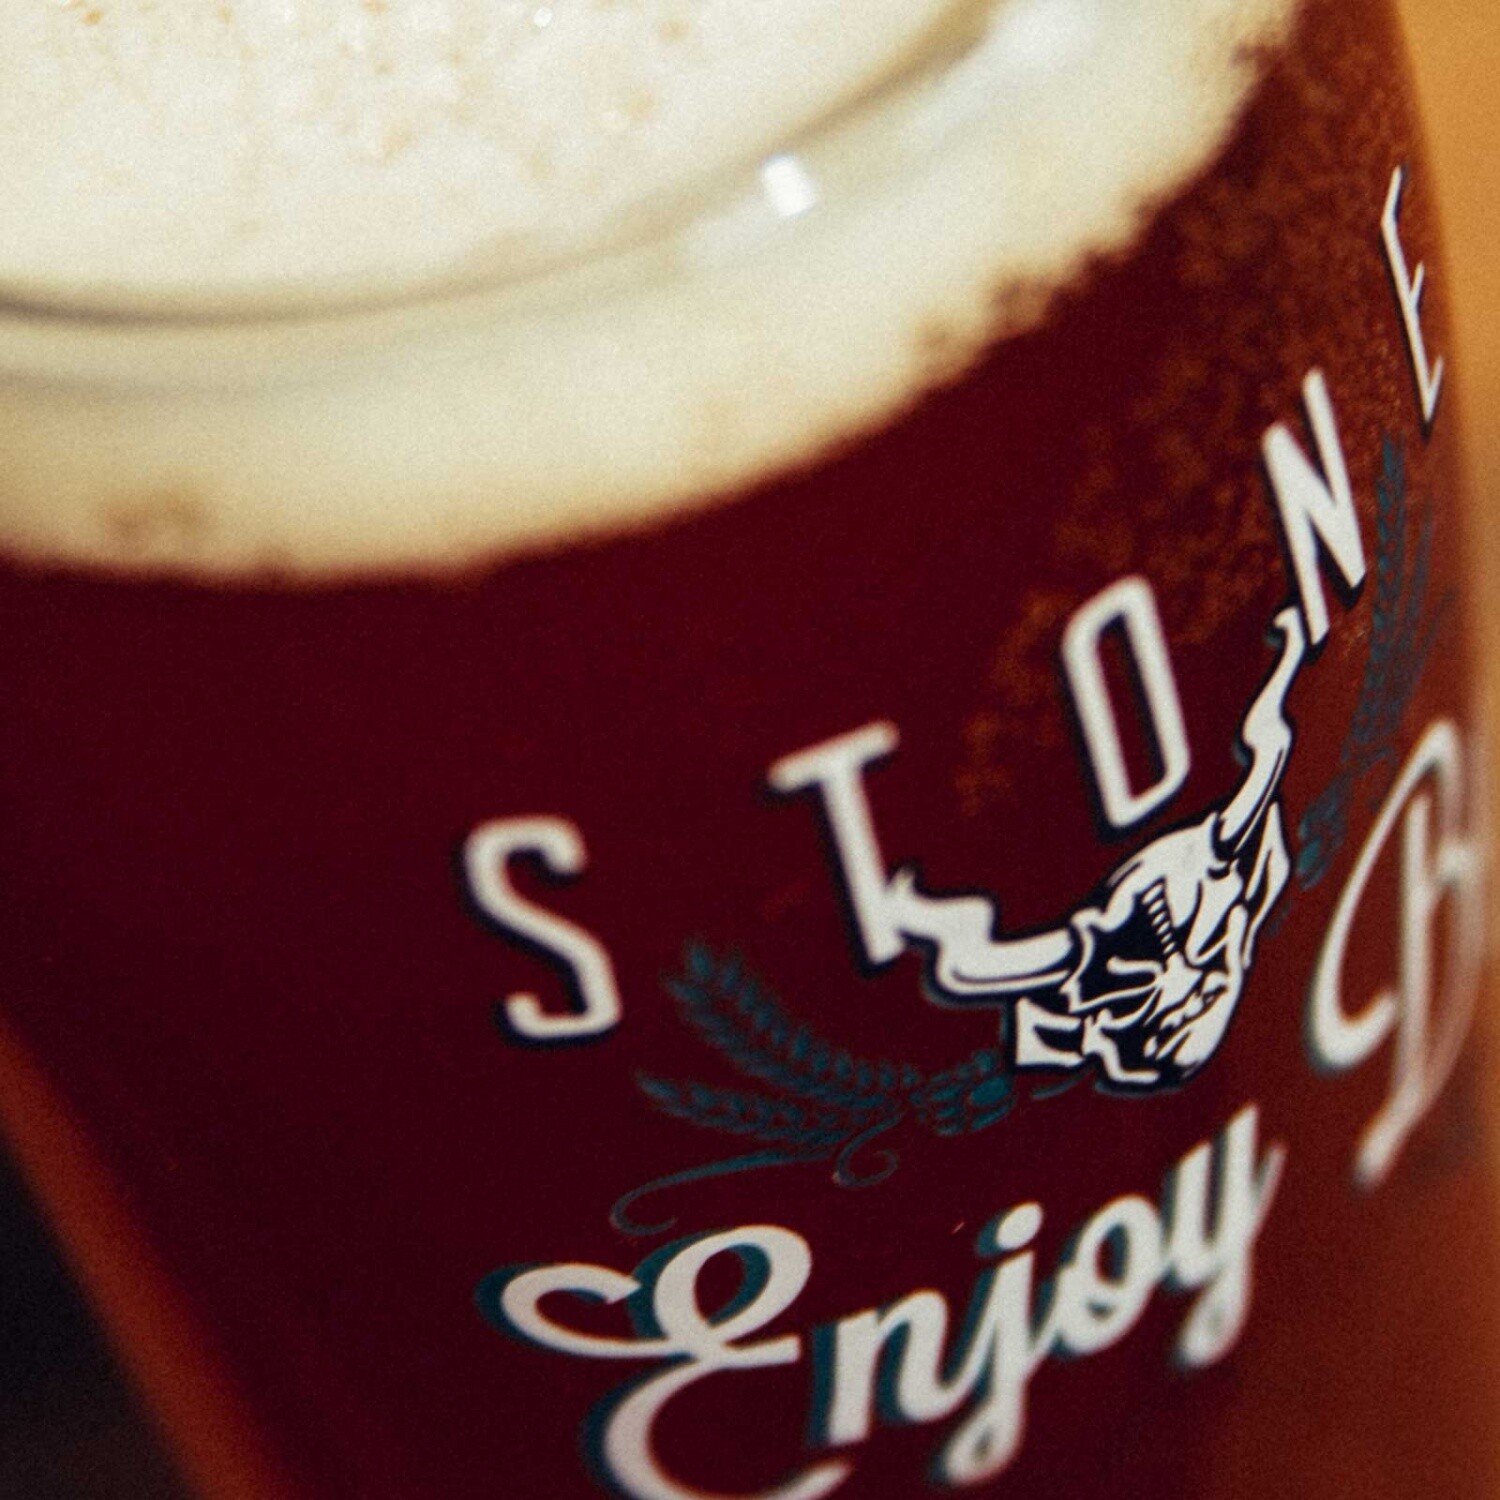 Stone Enjoy By 02.14.16 Unfiltered IPA glass